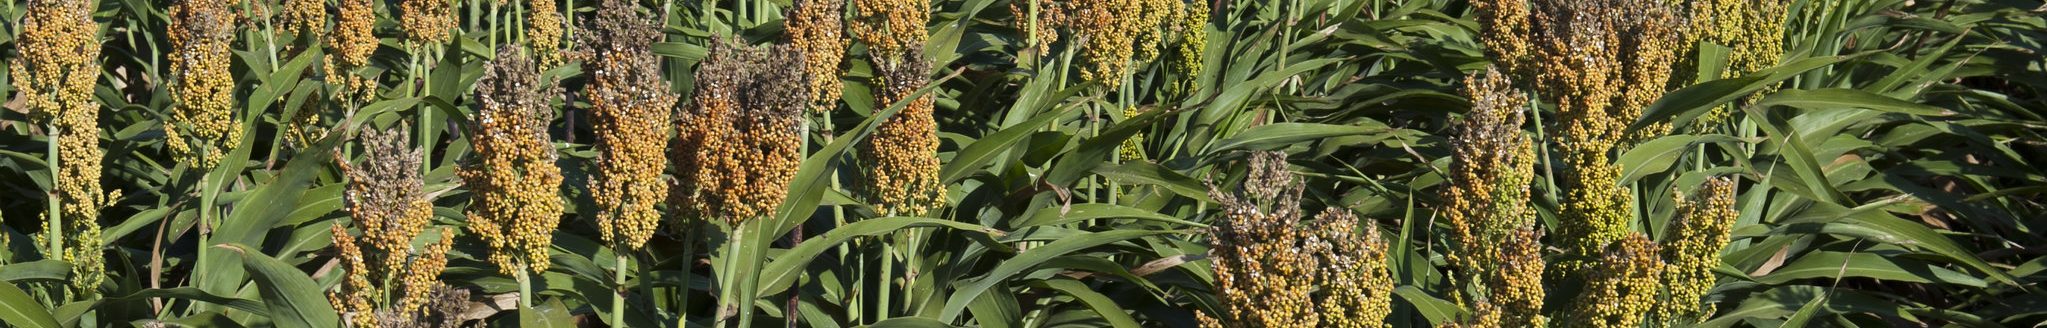 Peanut, sorghum (pictured) and pearl millet are part of the local cuisine in much of Africa and work together to create a resilient rotation for farmers, and nutritious diet for consumers. (Photo: Kansas State University Research and Extension news service.)